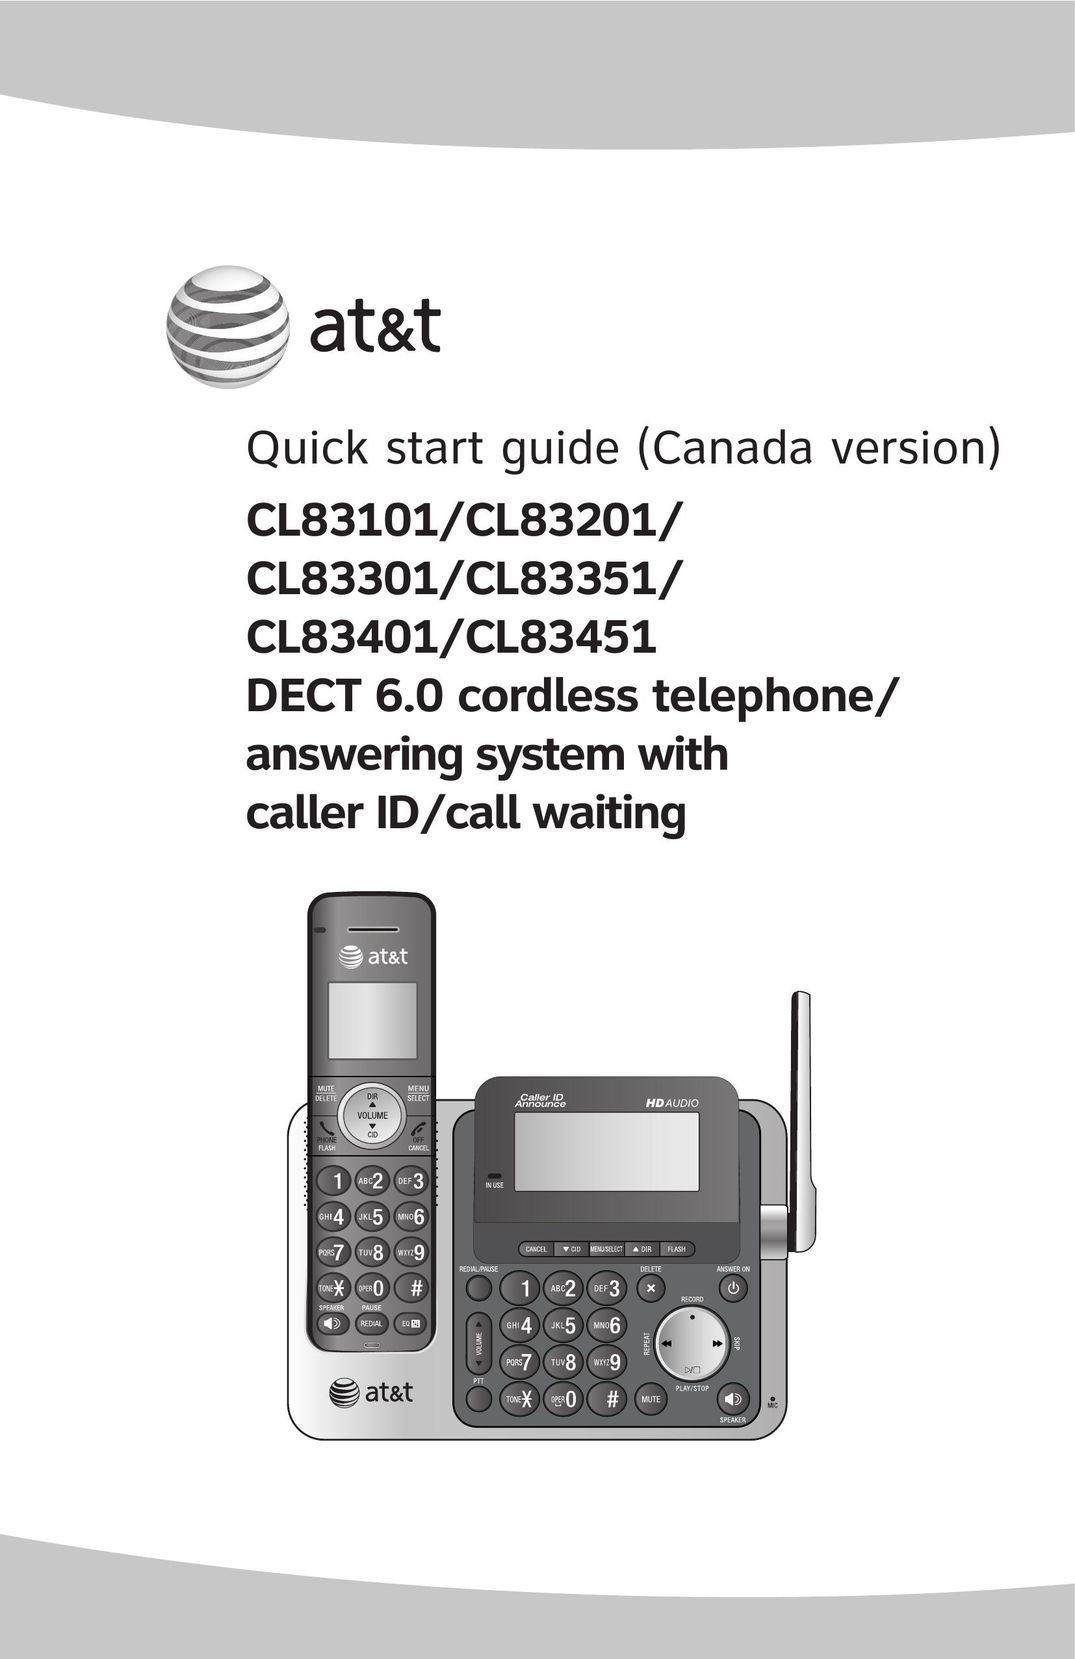 A & T International CL83301 Cordless Telephone User Manual (Page 1)